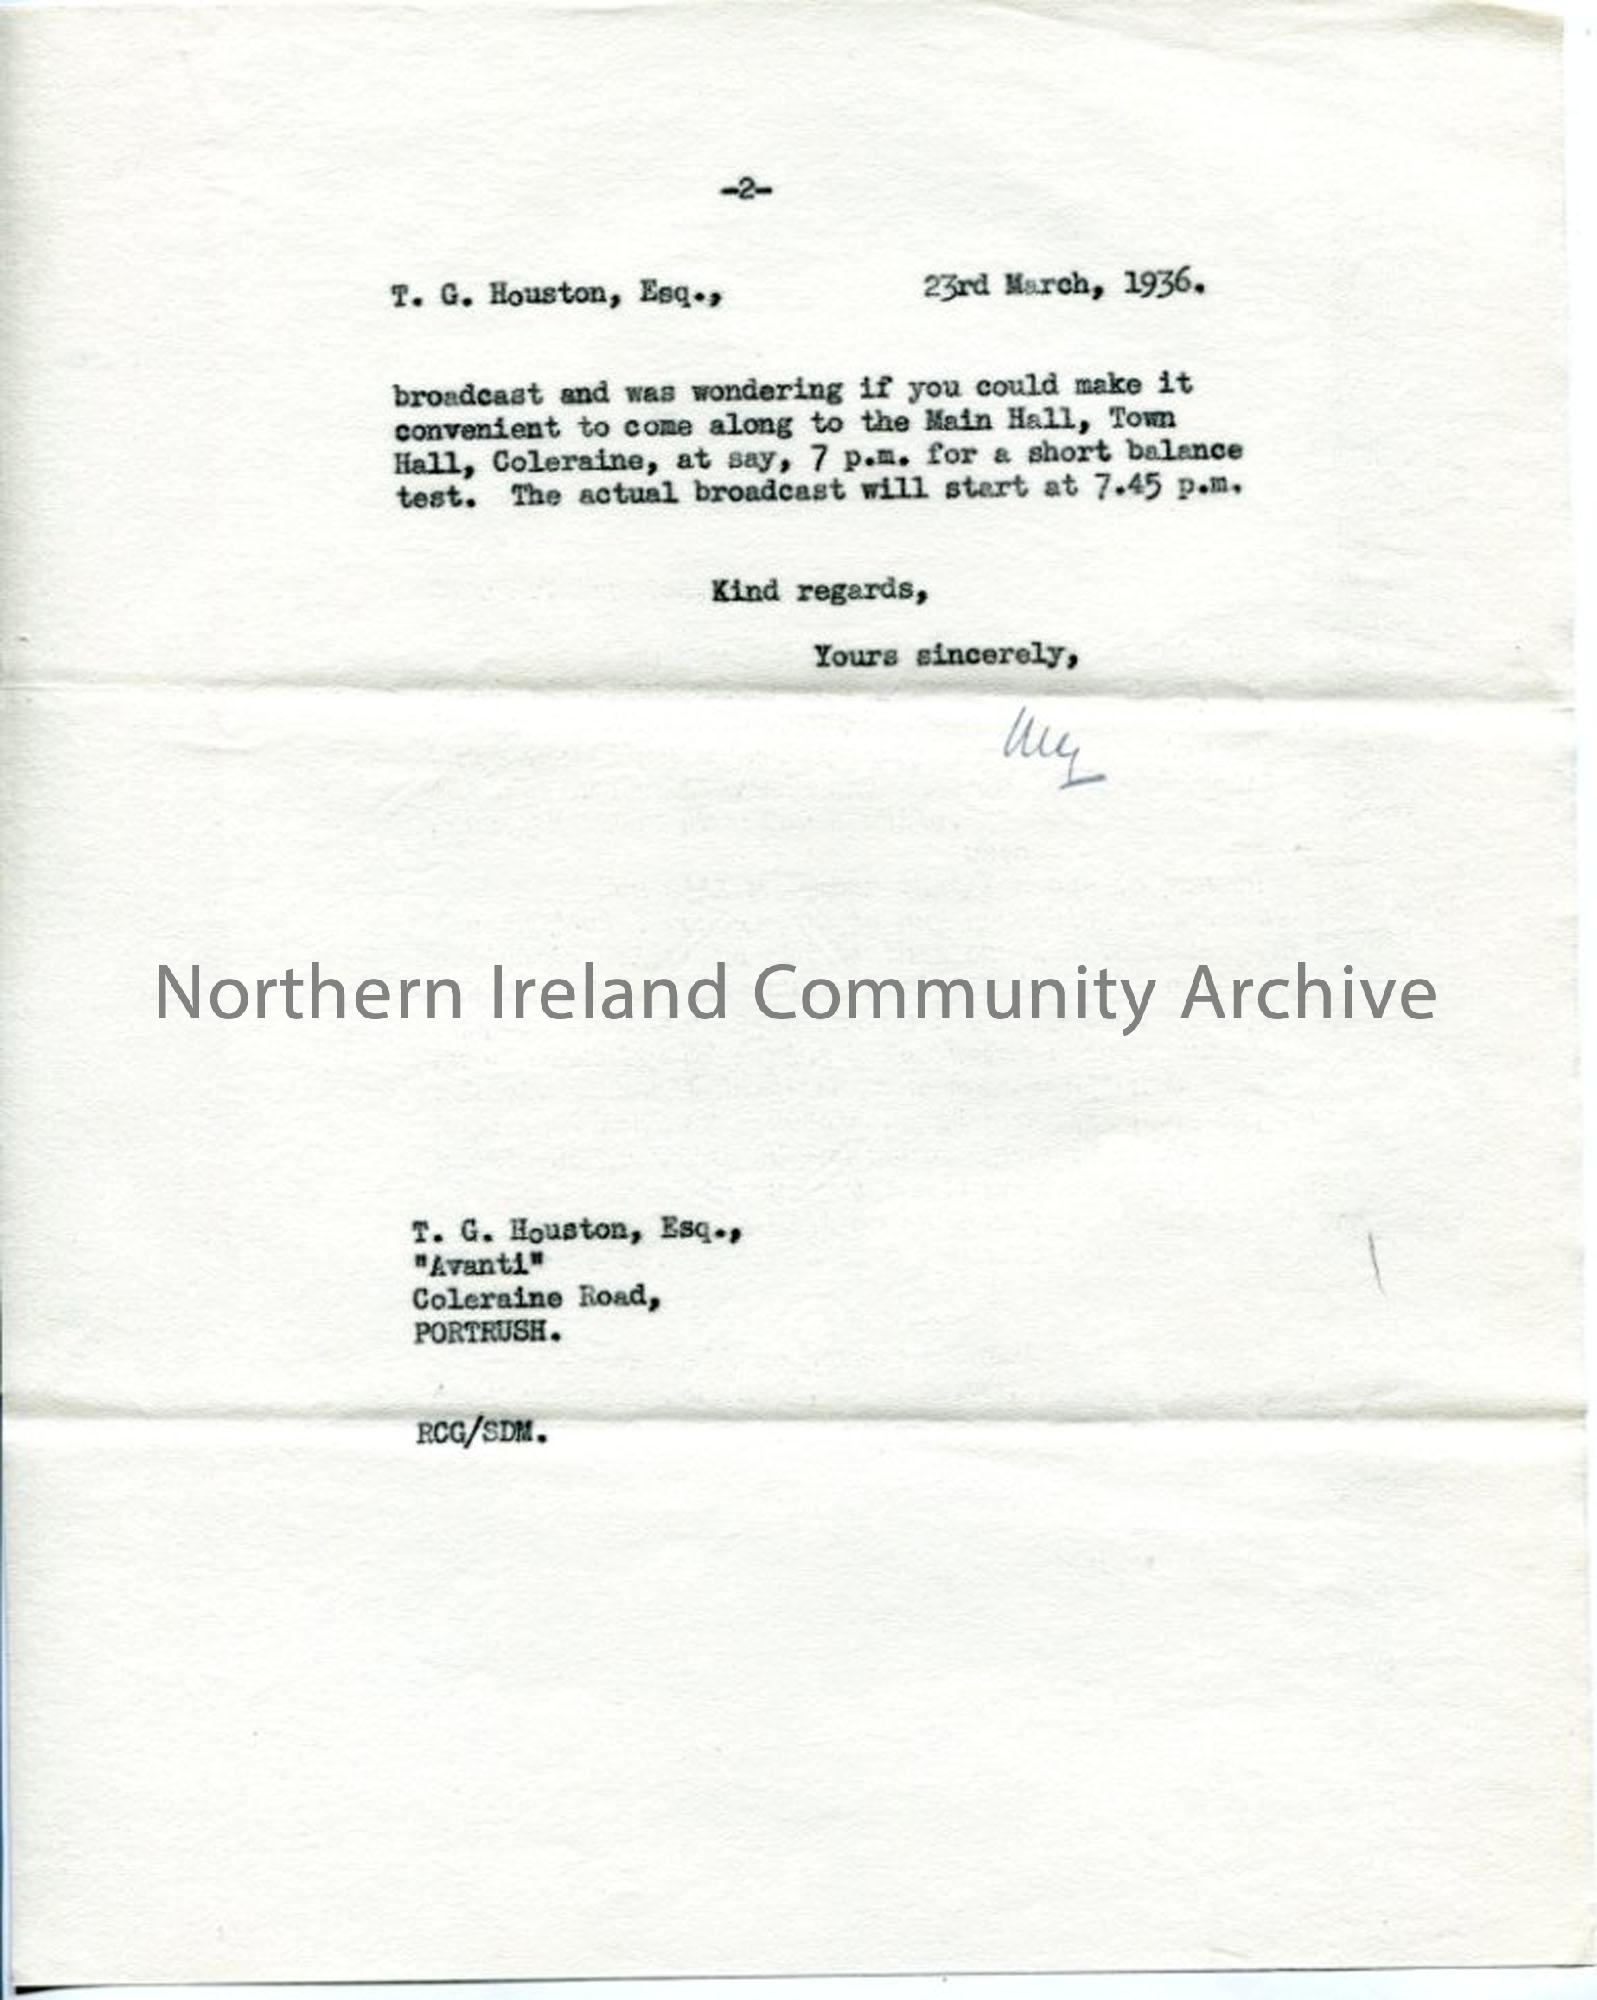 Page 2 of 2 : Letter to Mr T. G. Houston from the BBC, dated 23.3.1936